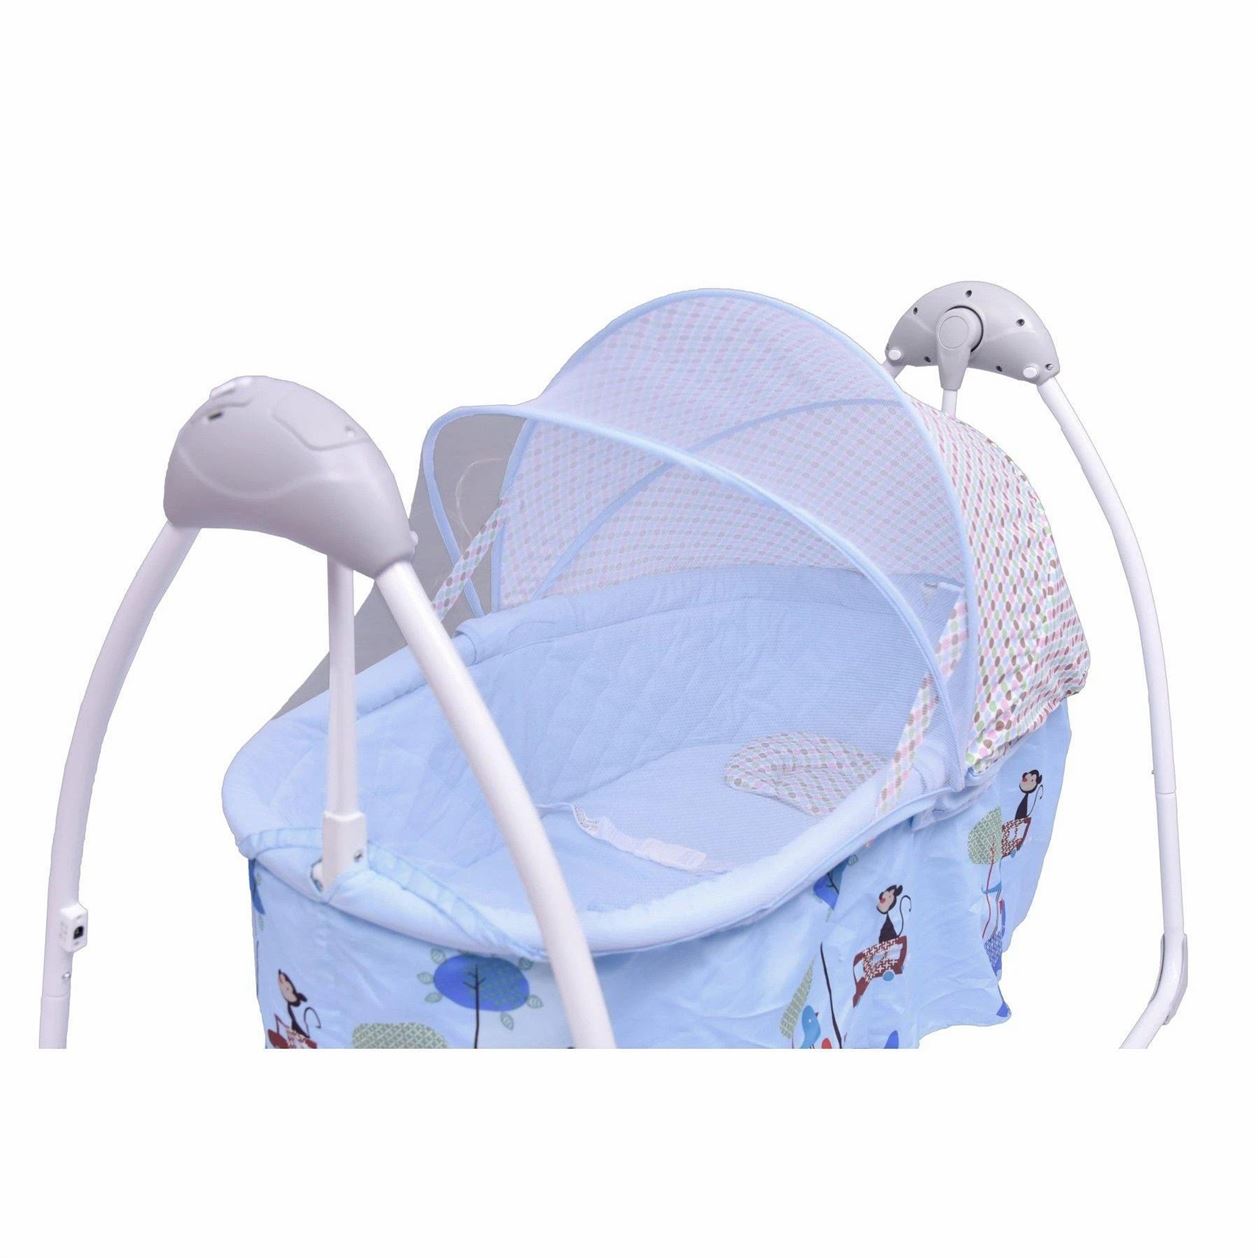 R FOR RABBIT Lullabies Baby Cradle with Remote Control & Mosquito Net - Blue